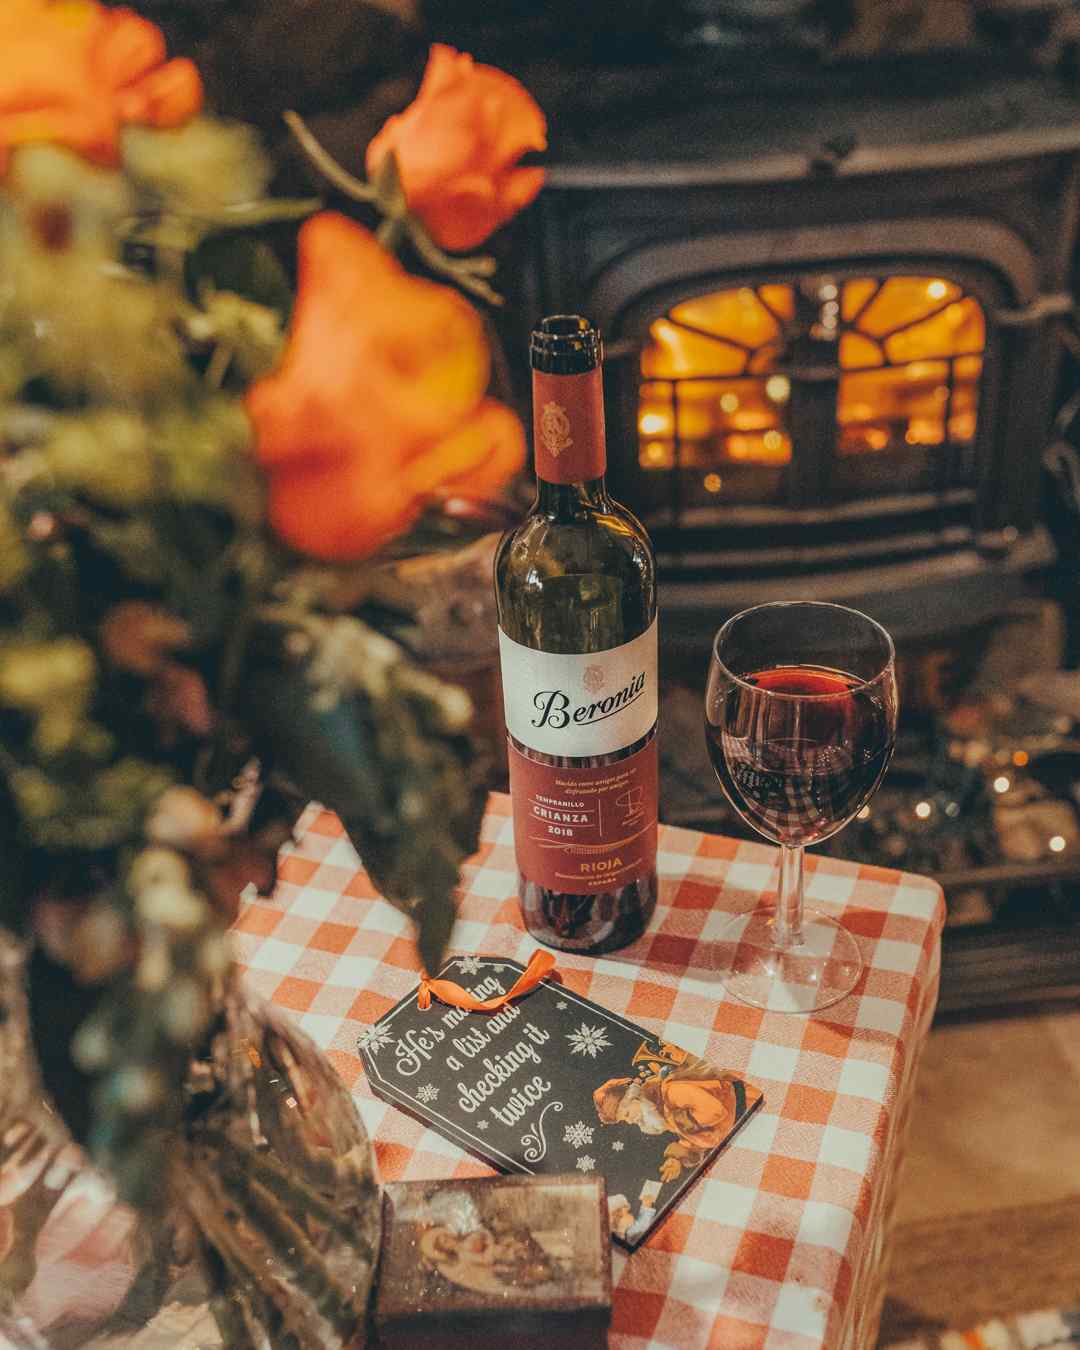 Bottle of Beronia Wine in front of a wood burning stove produced by YesMore Wine Advertising Agency